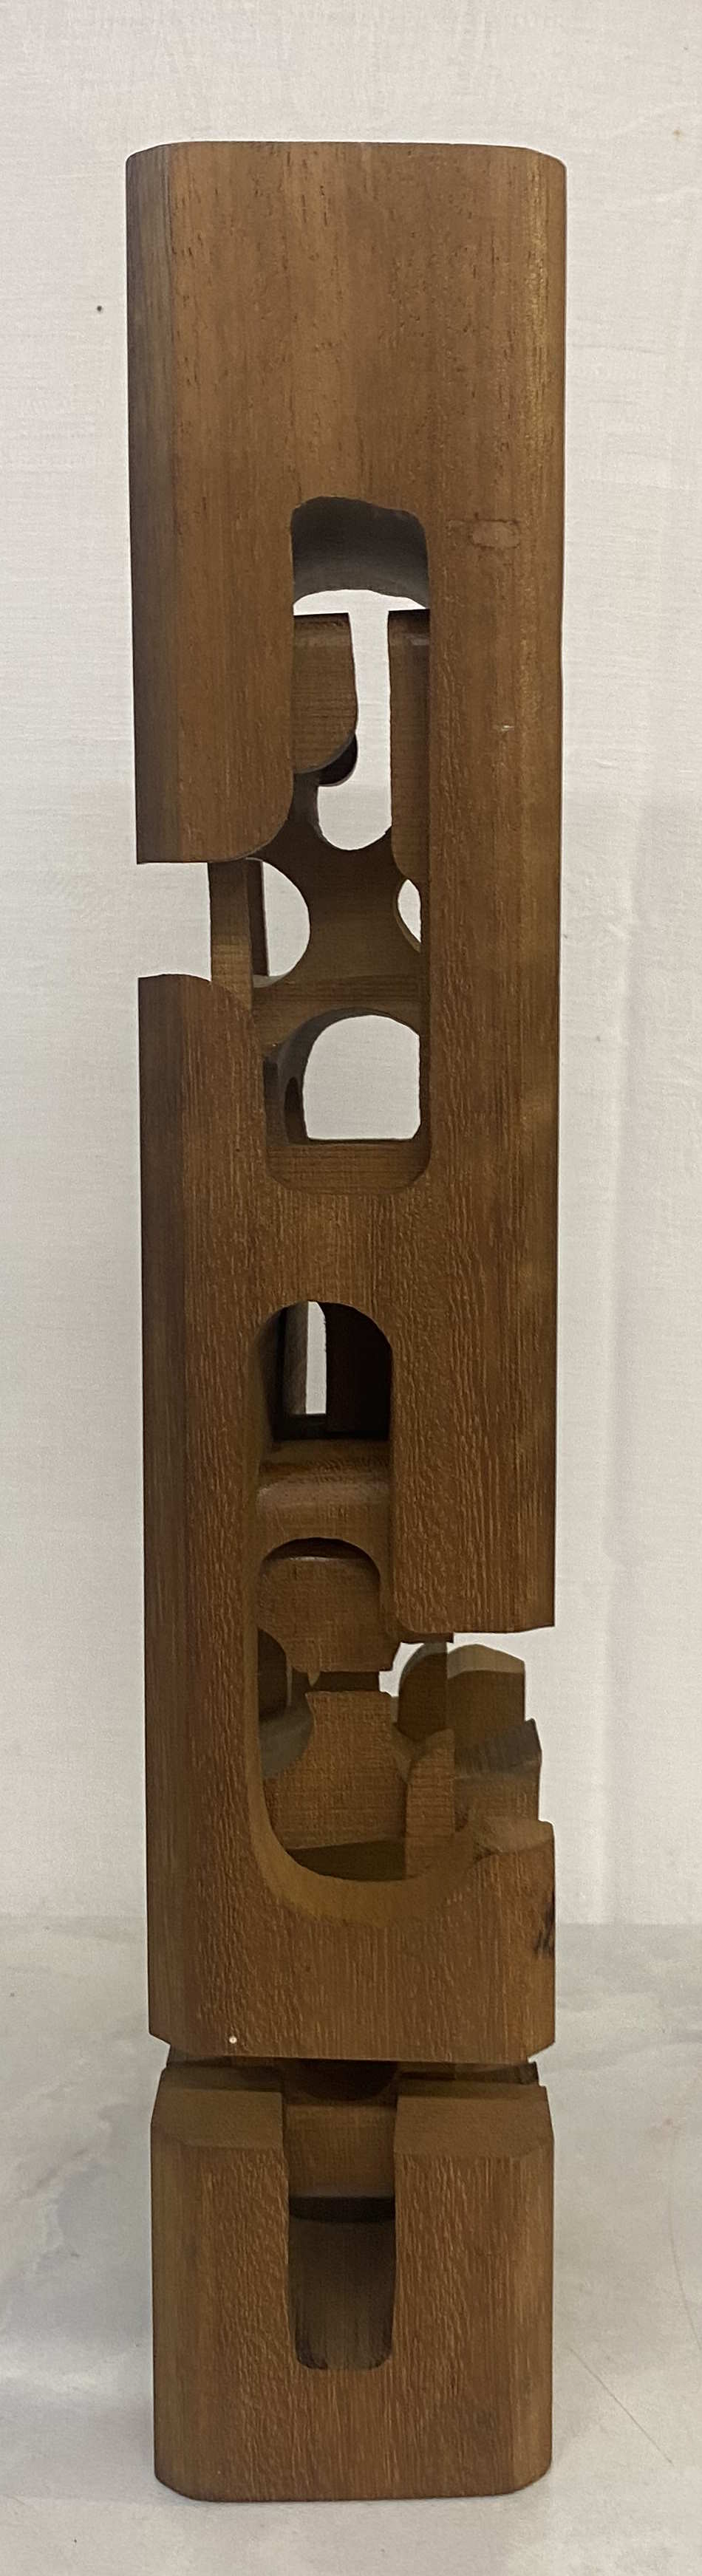 An abstract wooden sculpture attributed to Brian Willsher - Image 7 of 14